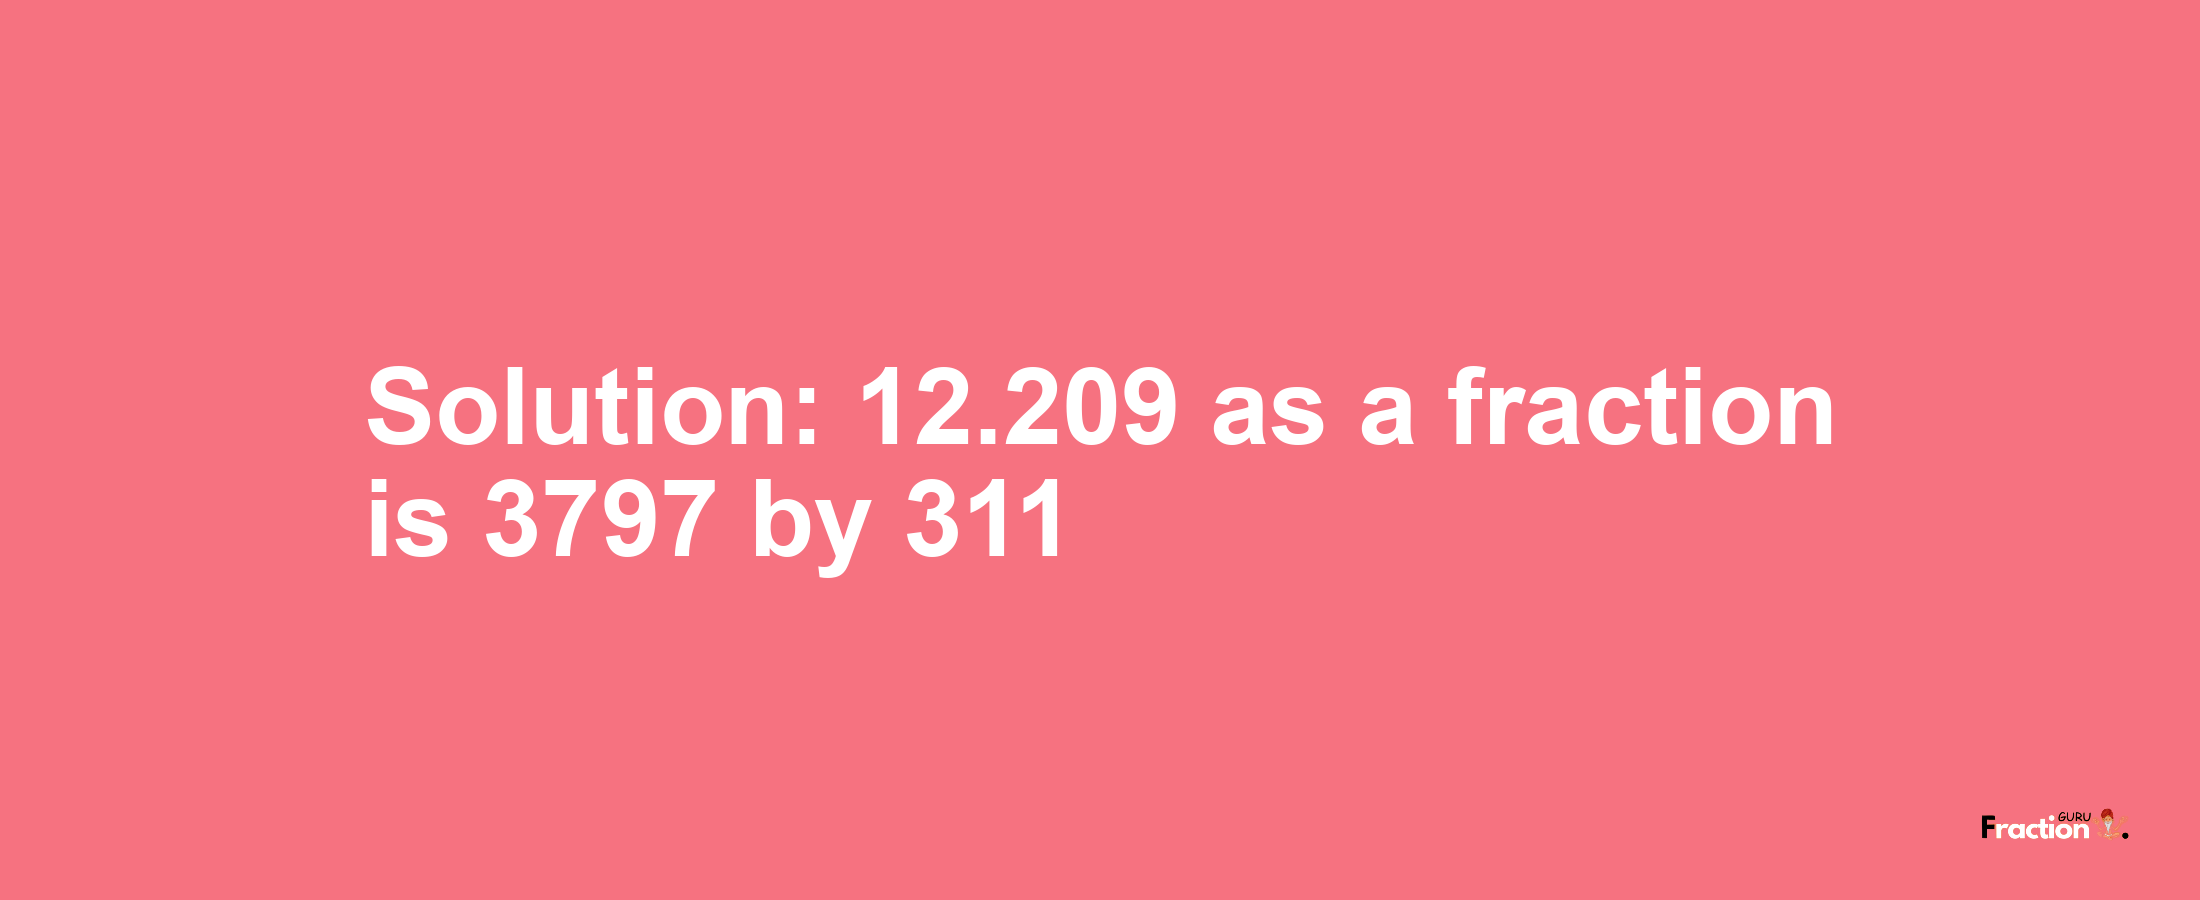 Solution:12.209 as a fraction is 3797/311